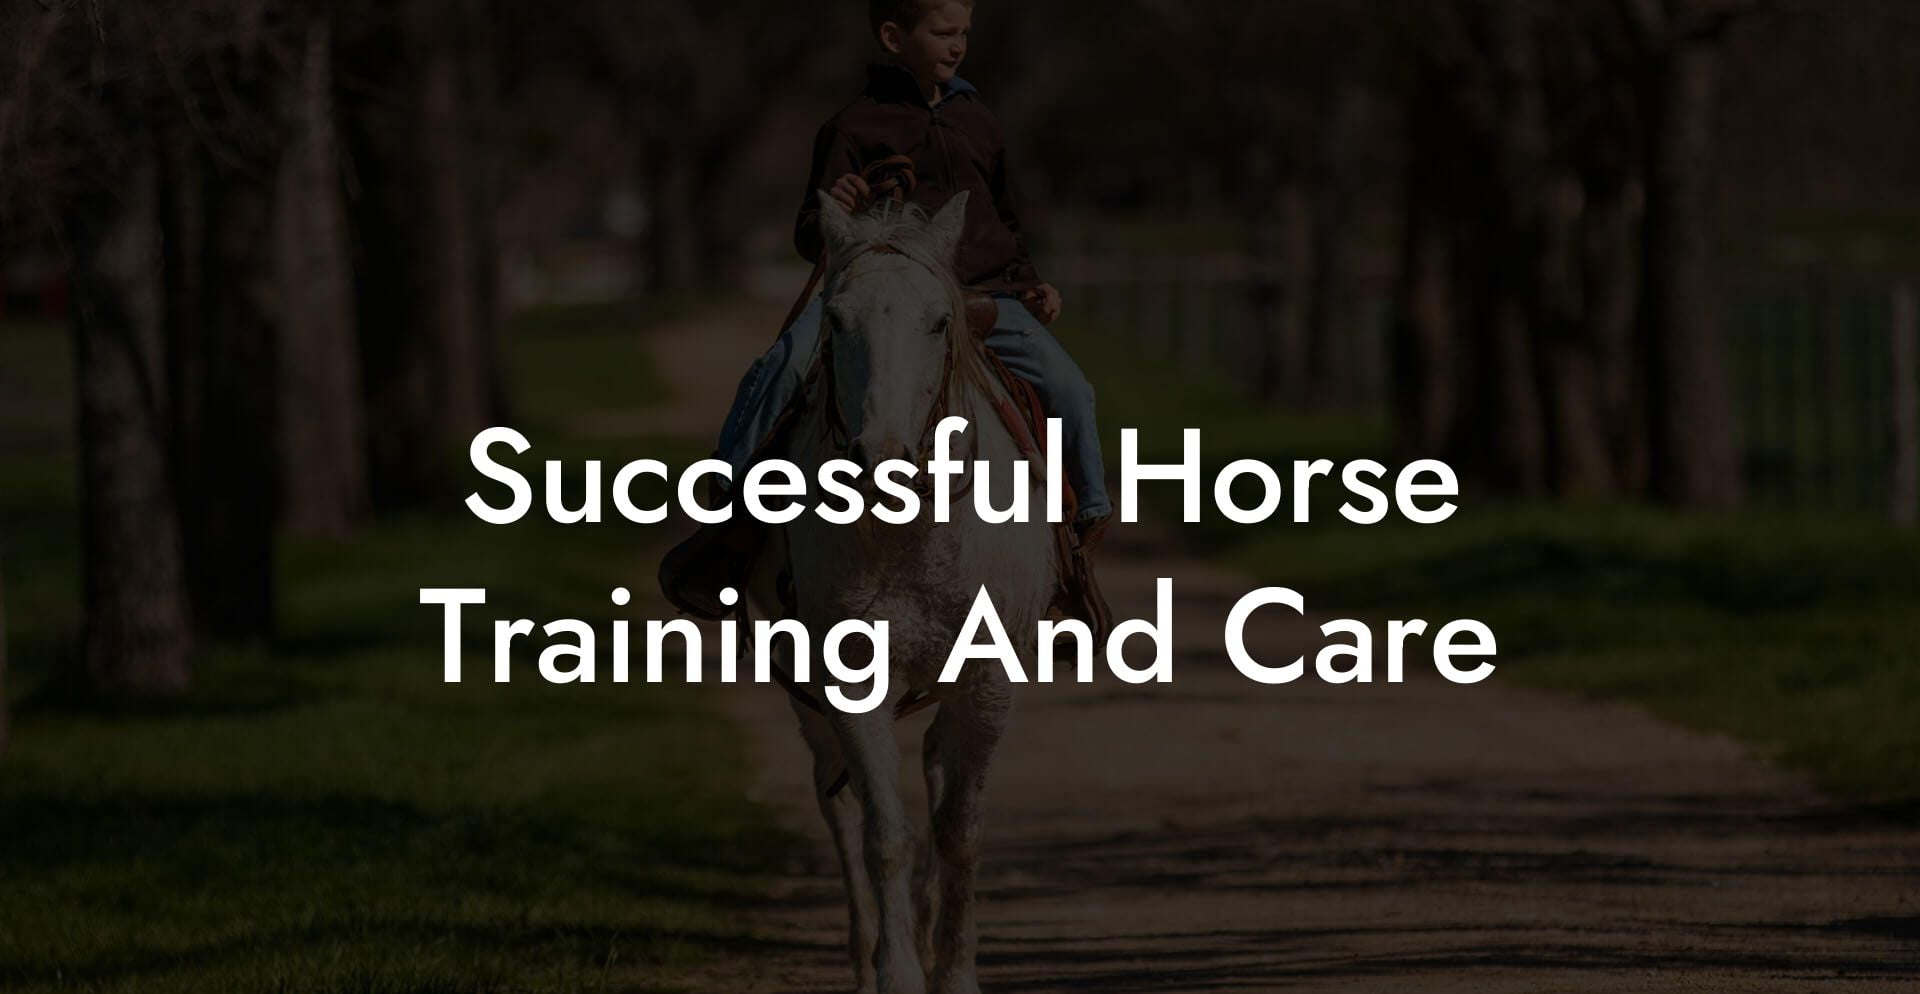 Successful Horse Training And Care